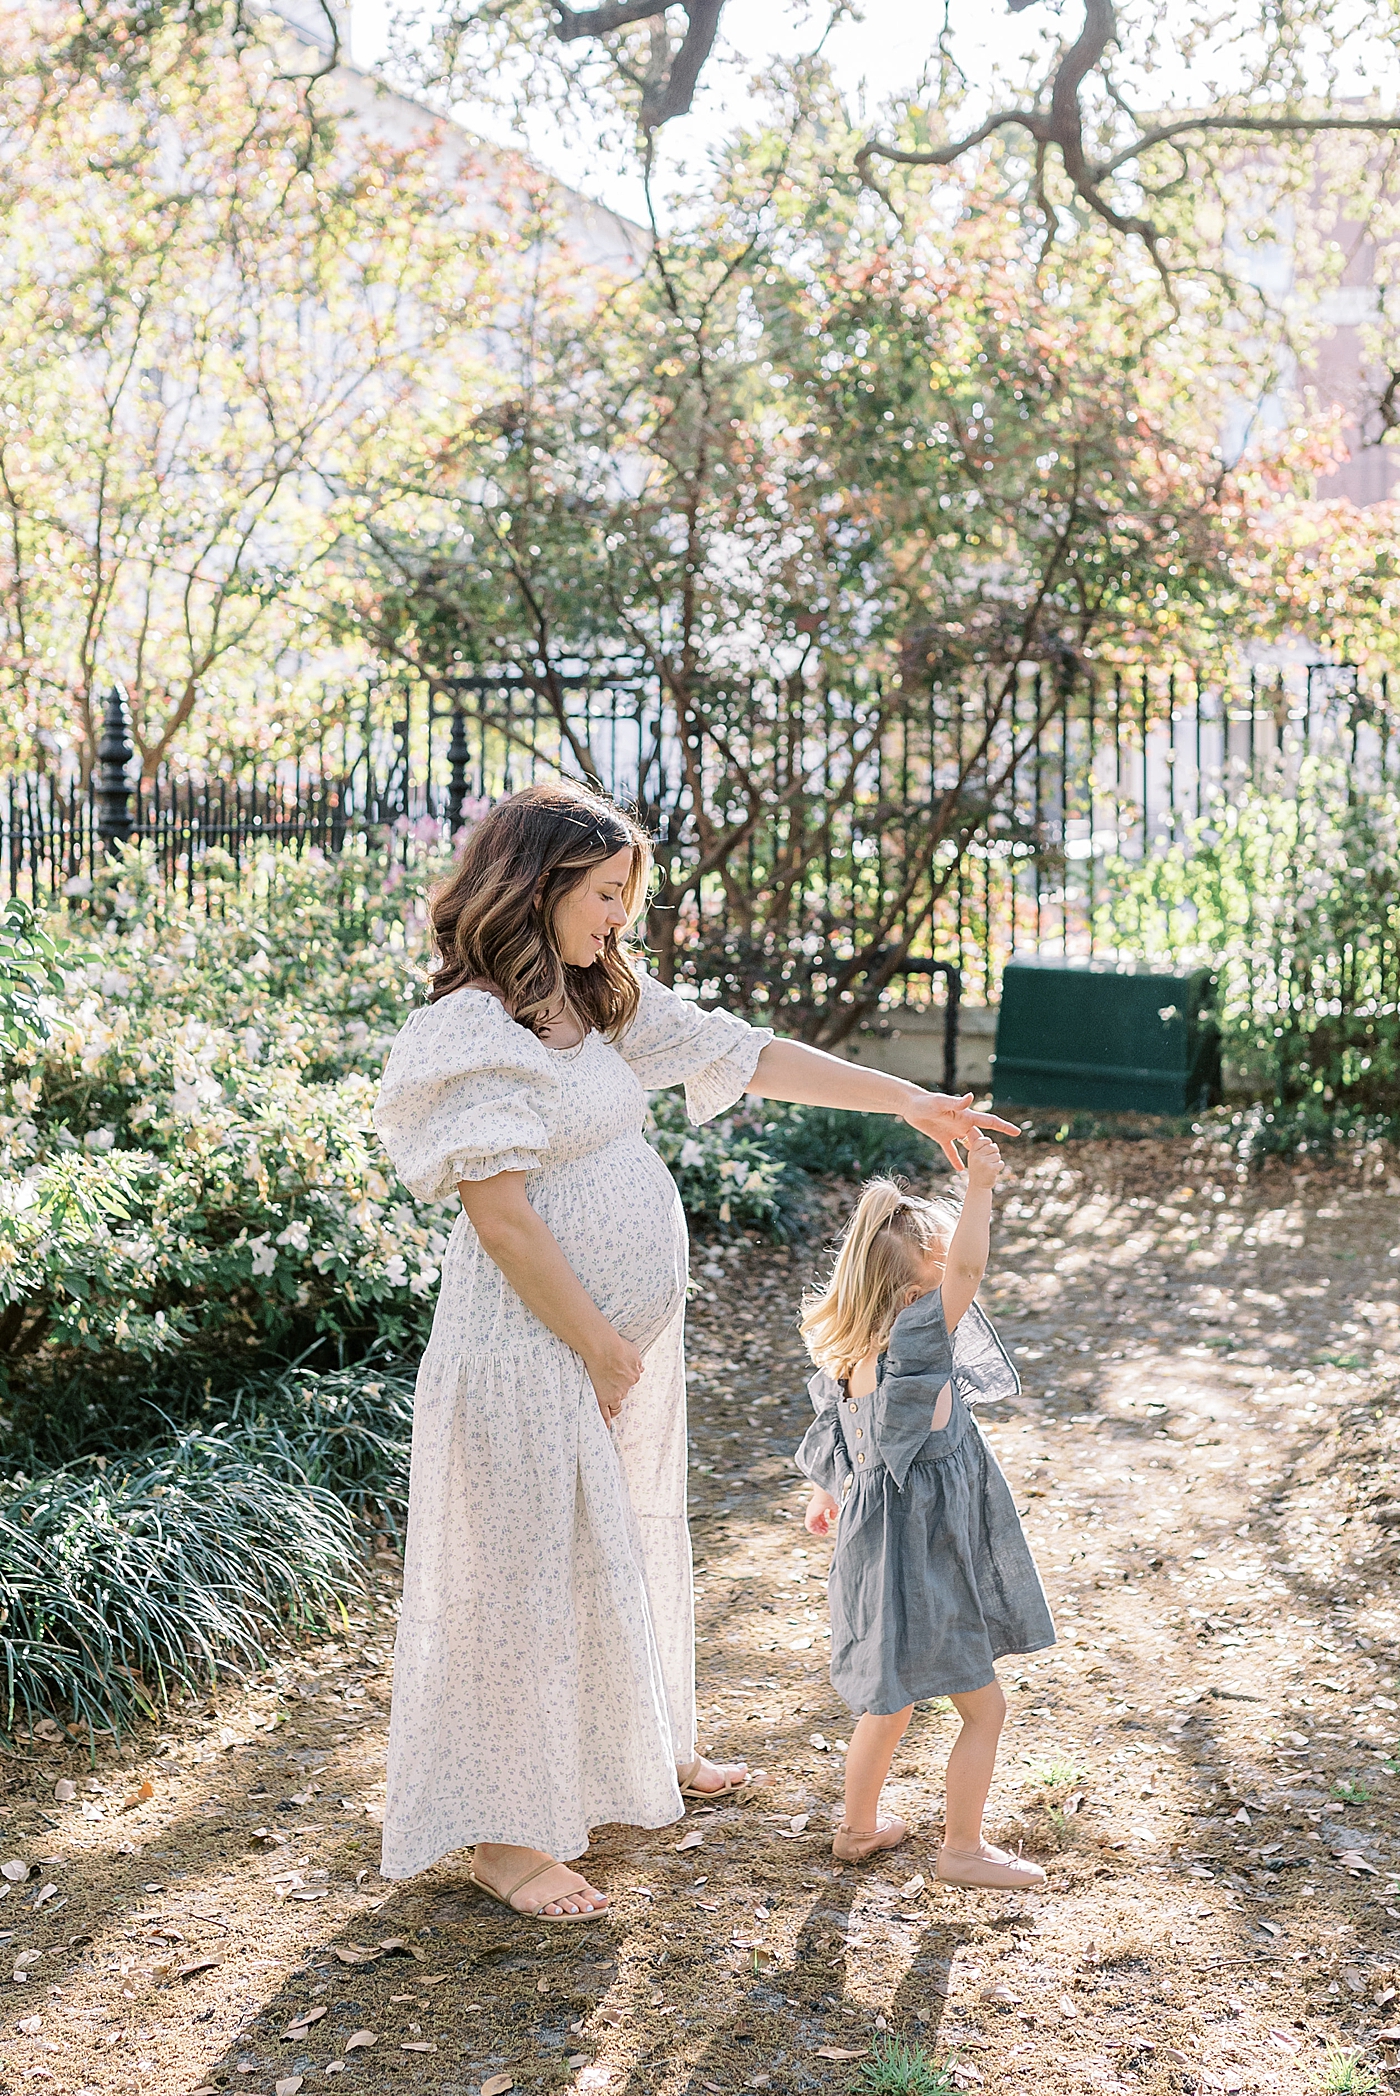 Expecting mother spinning her daughter in a garden with an iron gate | Image by Caitlyn Motycka